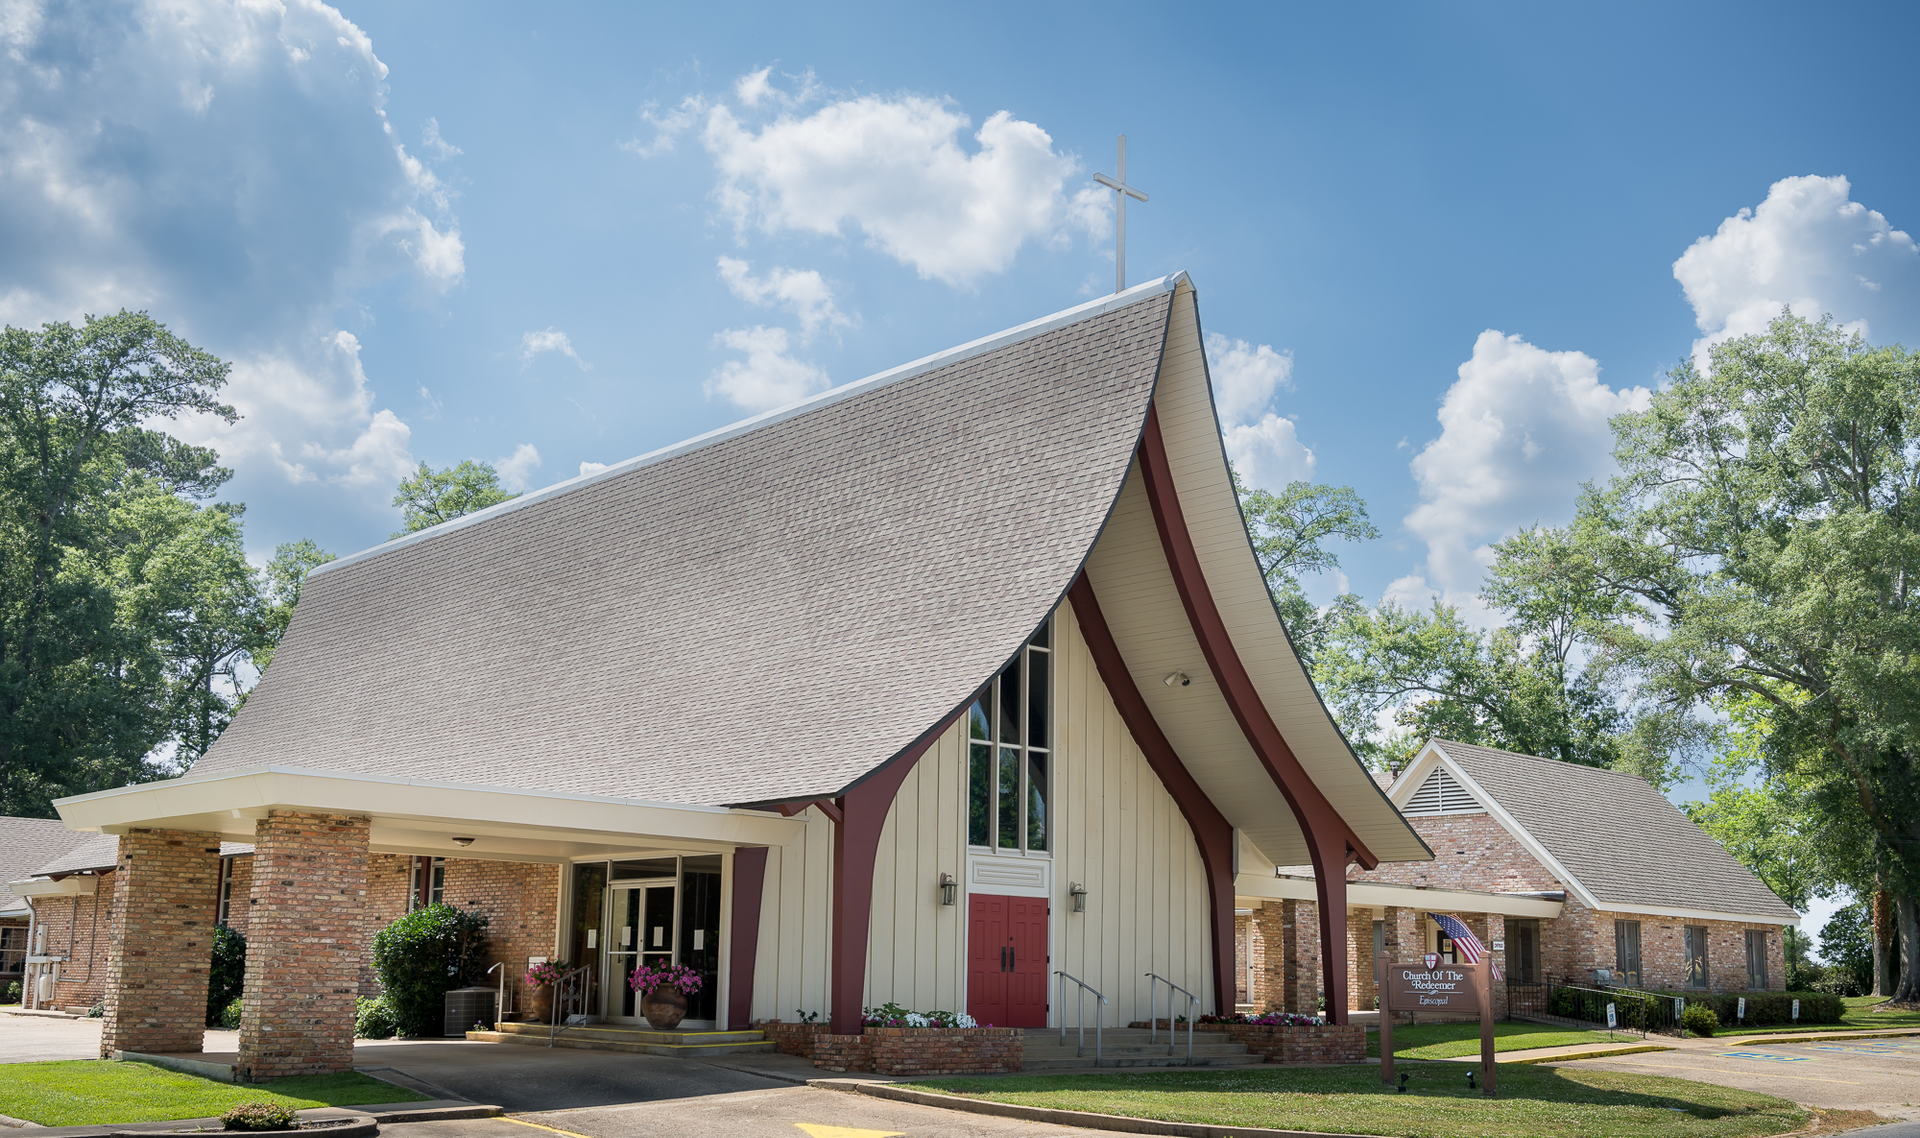 Exterior of the Episcopal Church of the Redeemer in Ruston, Louisiana